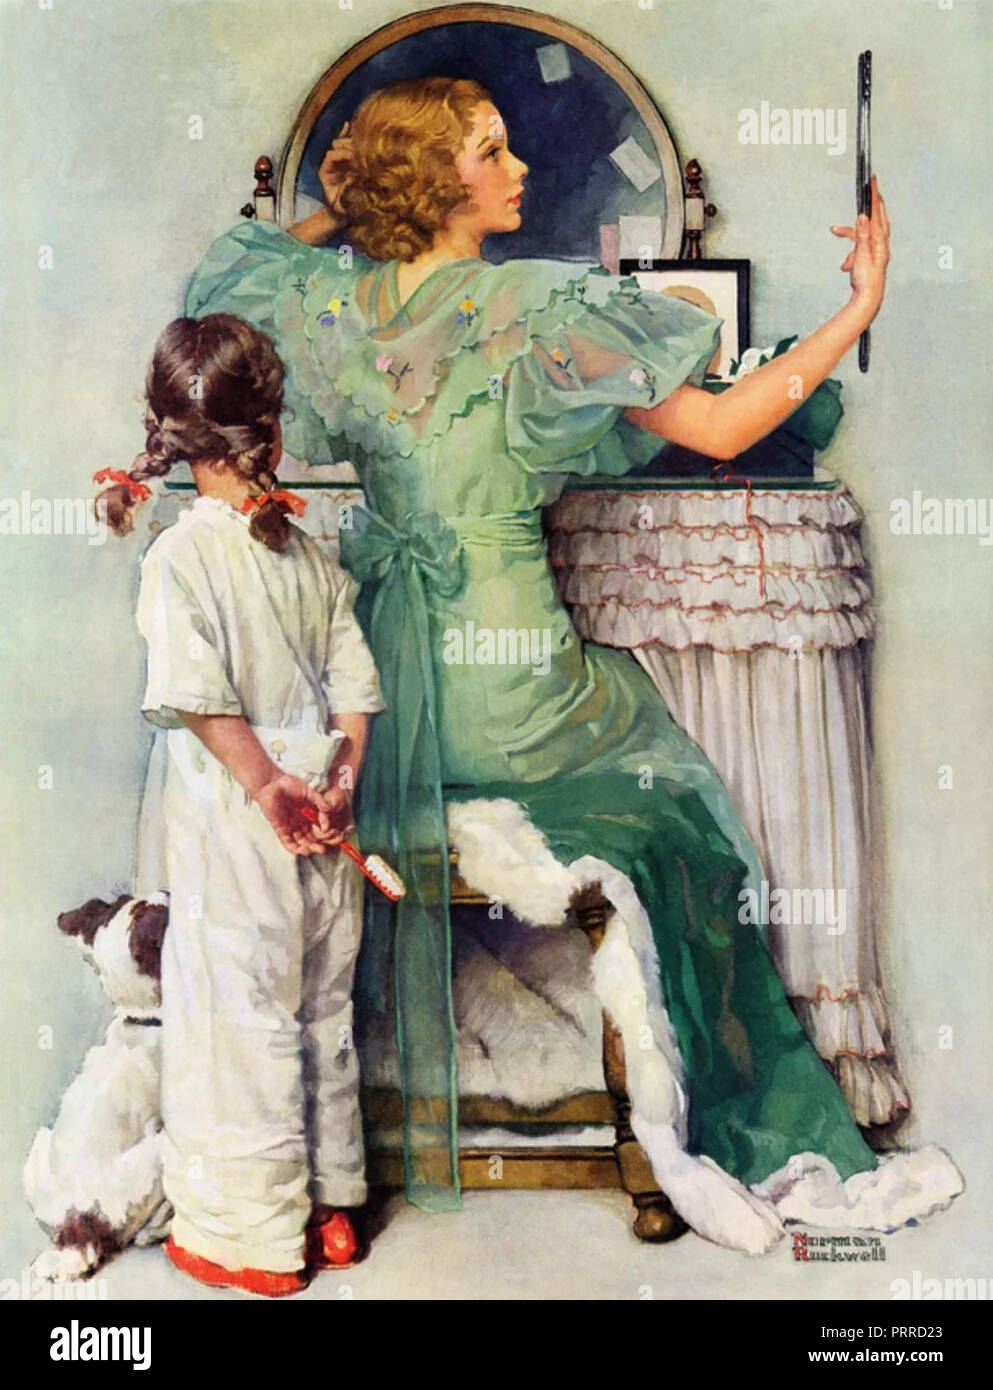 NORMAN ROCKWELL (1894-1978) American author, painter and illustrator. The 1933 work 'Going Out' Stock Photo